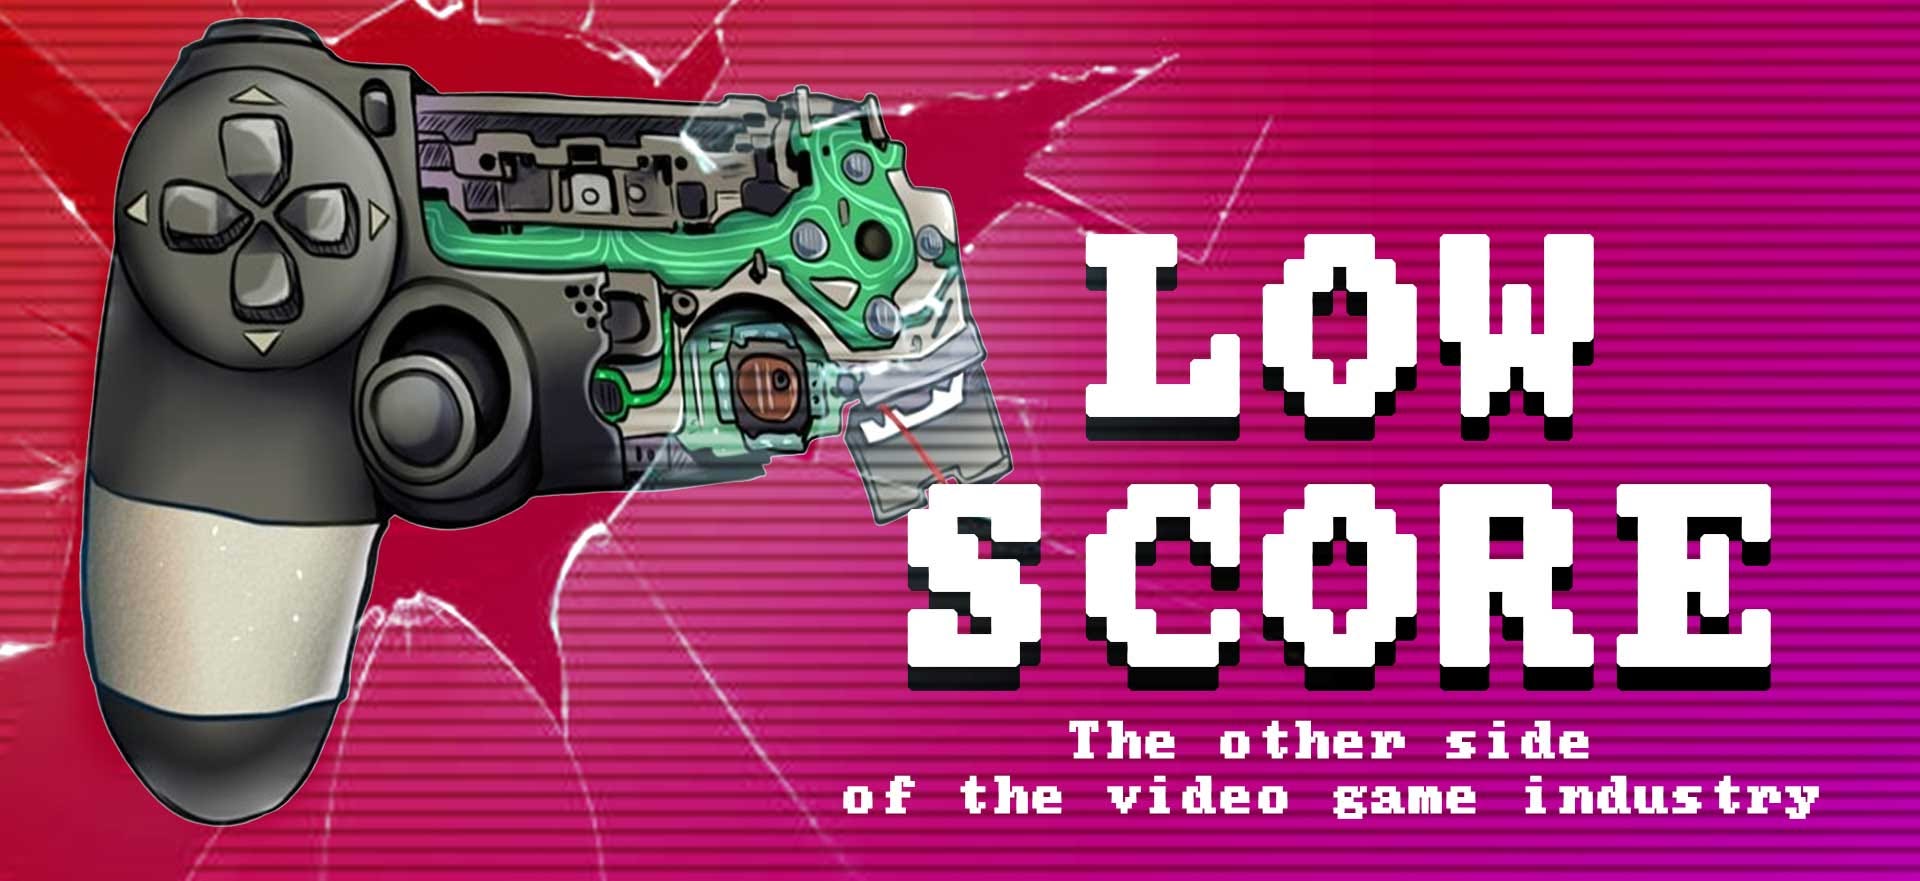 Low Score A Documentary About The Other Side Of The Video Game Industry By Felipe Pepe Sep 2020 Medium - this guy wants a aaa quality game made on roblox for no pay